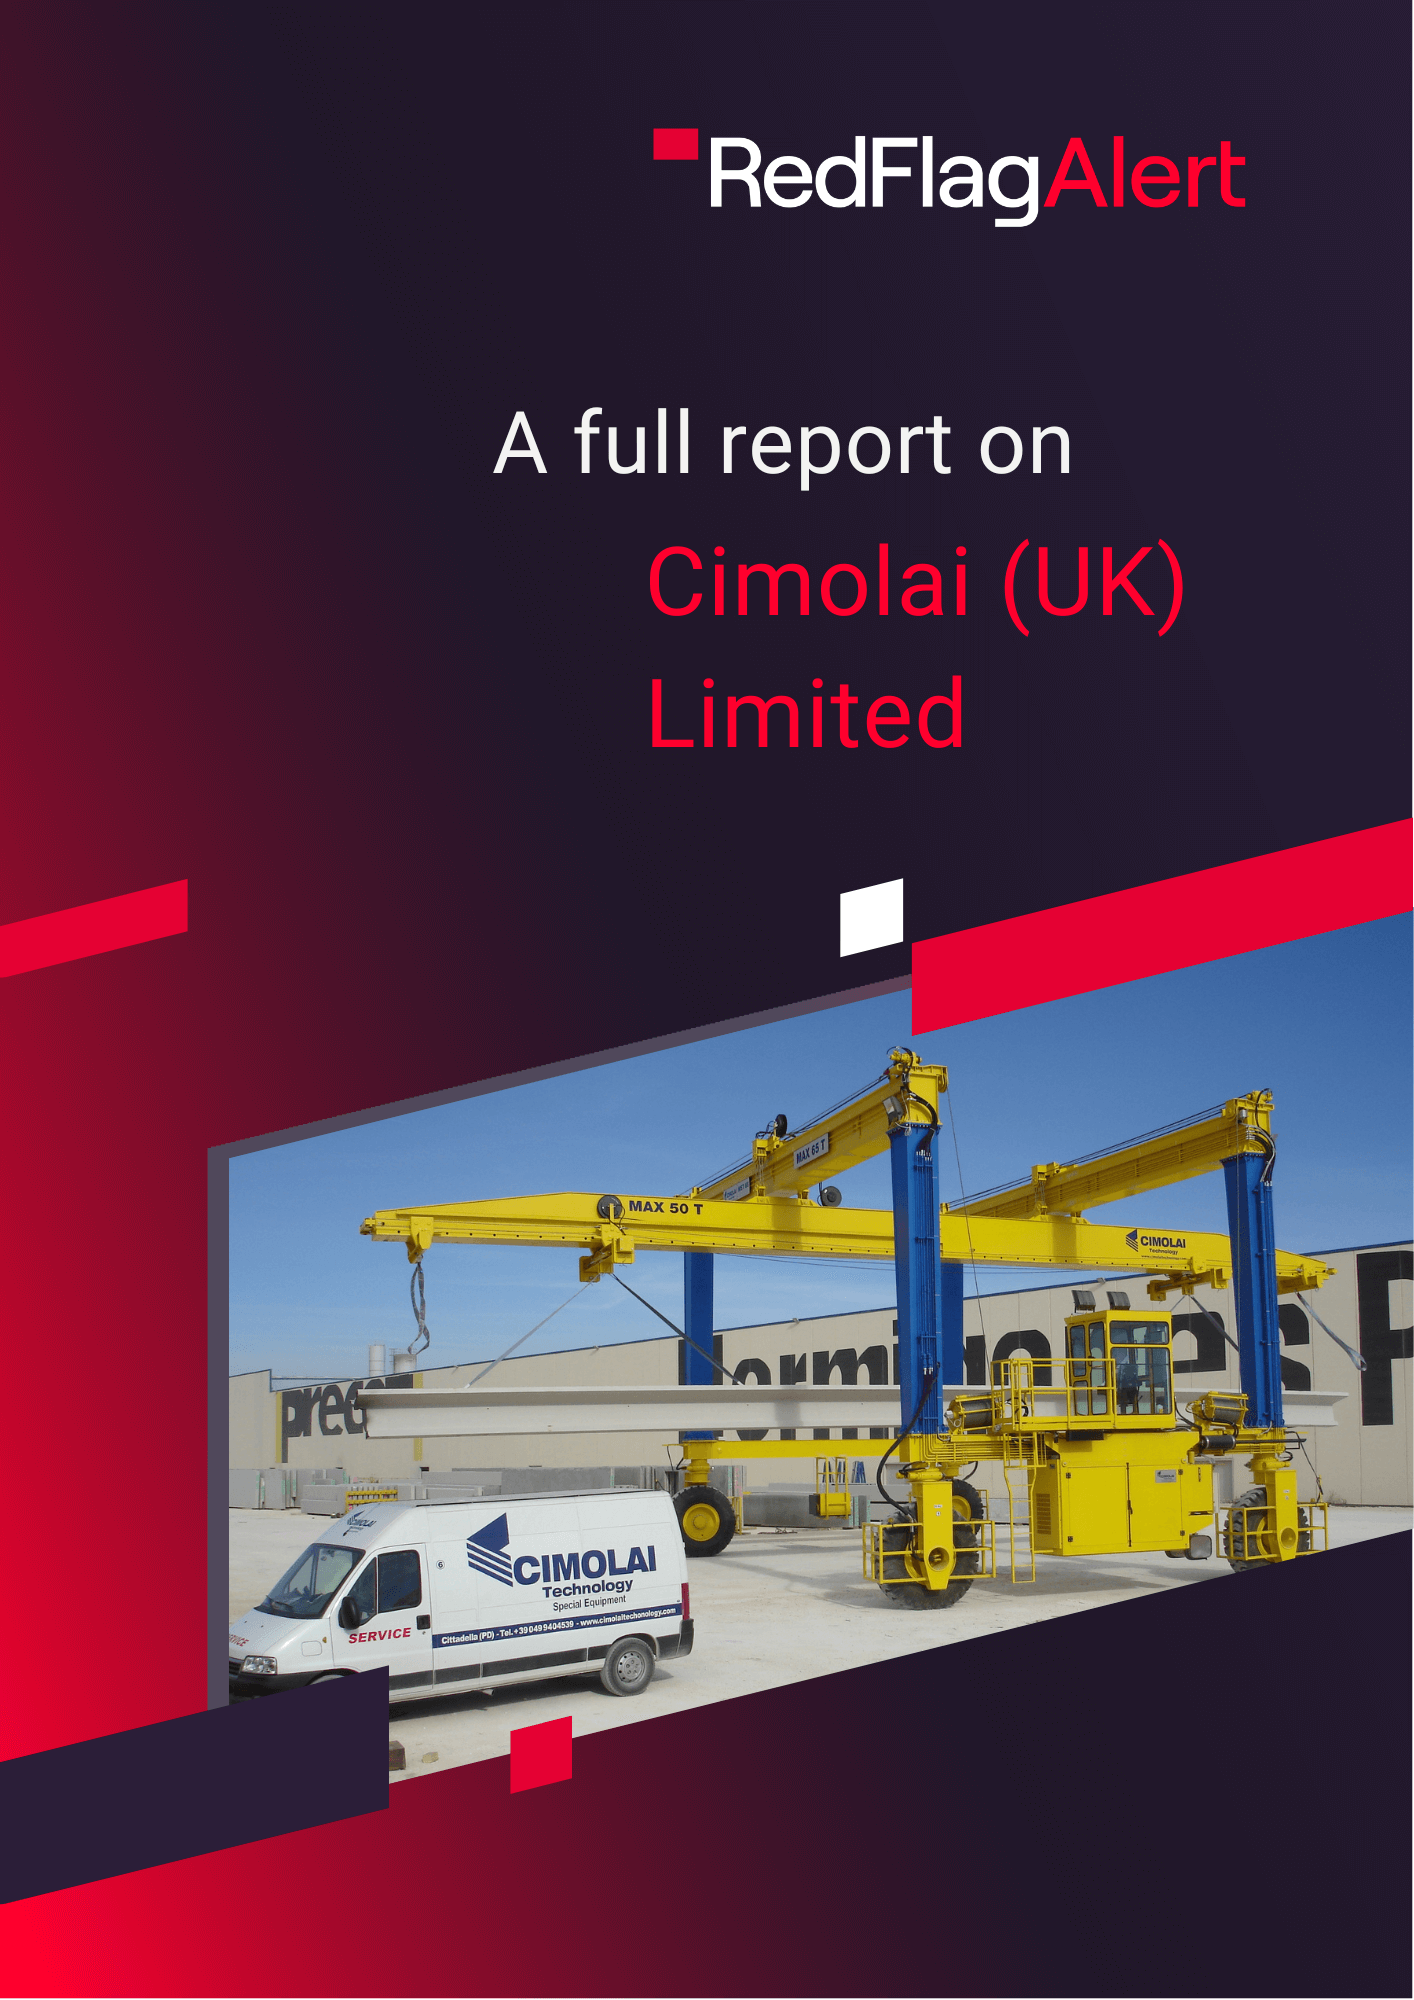 Cimolai (UK) Limited in financial distress